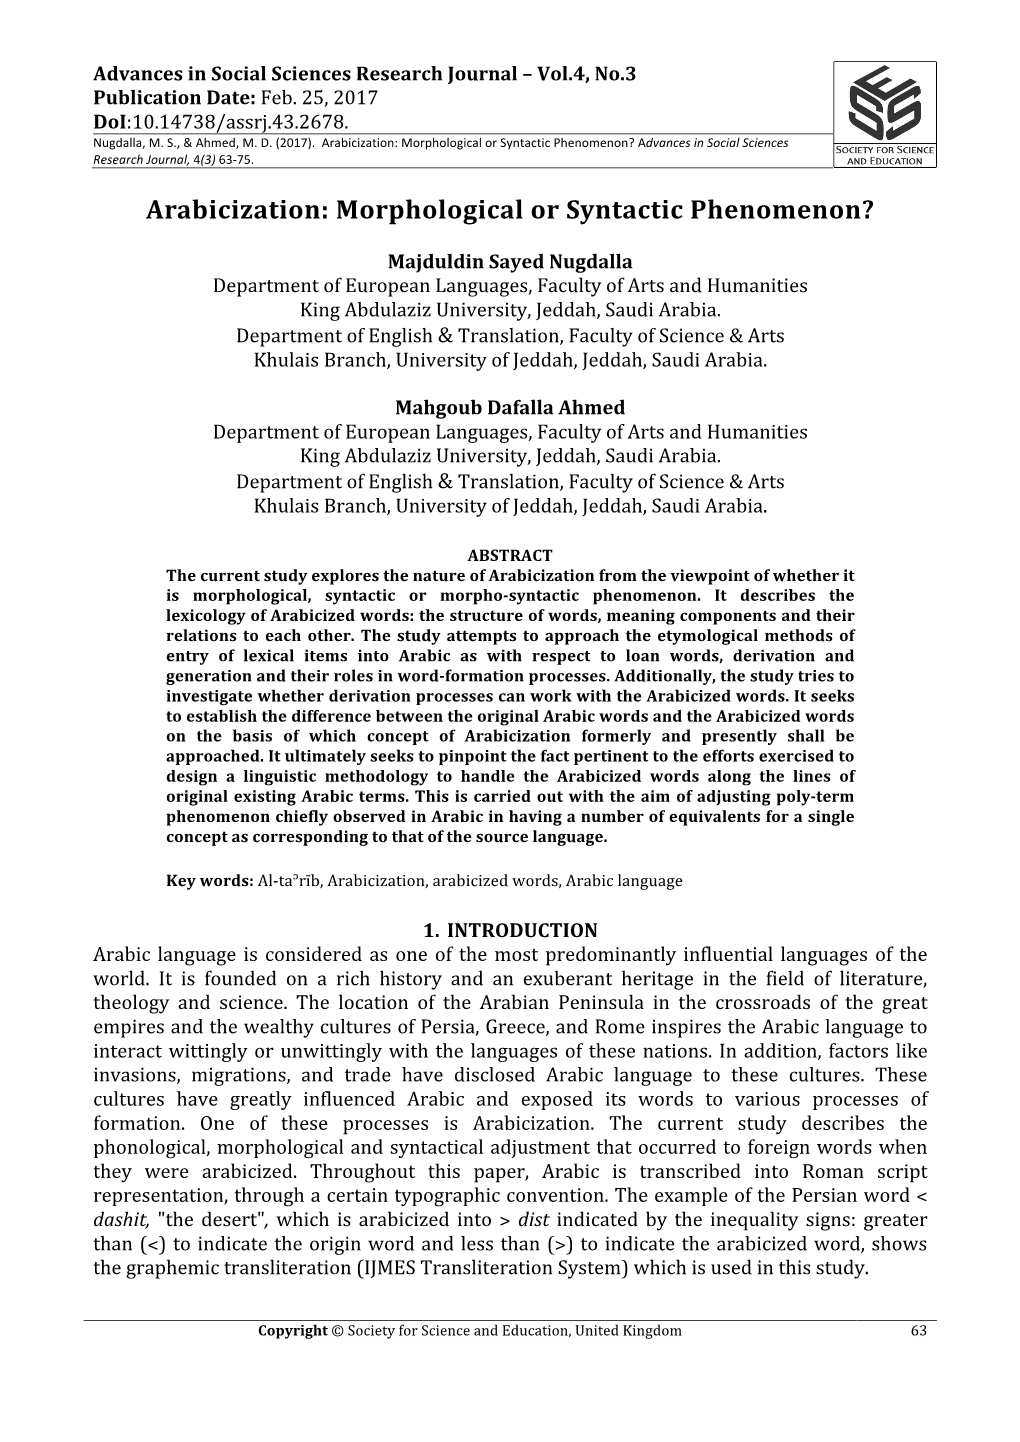 Arabicization: Morphological Or Syntactic Phenomenon? Advances in Social Sciences Research Journal, 4(3) 63-75